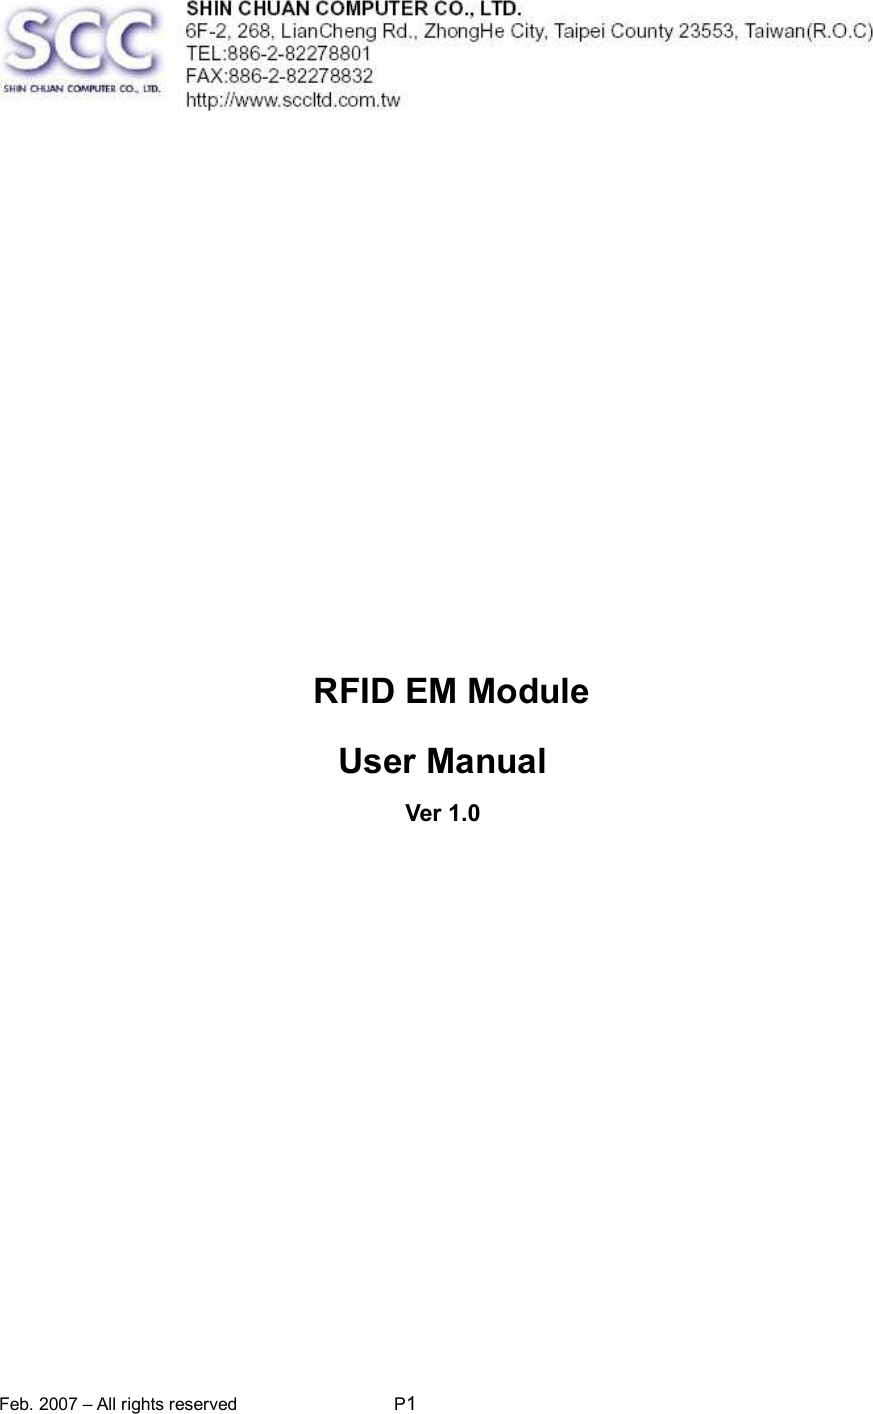 Feb. 2007 – All rights reserved  P1               RFID EM Module User Manual Ver 1.0  